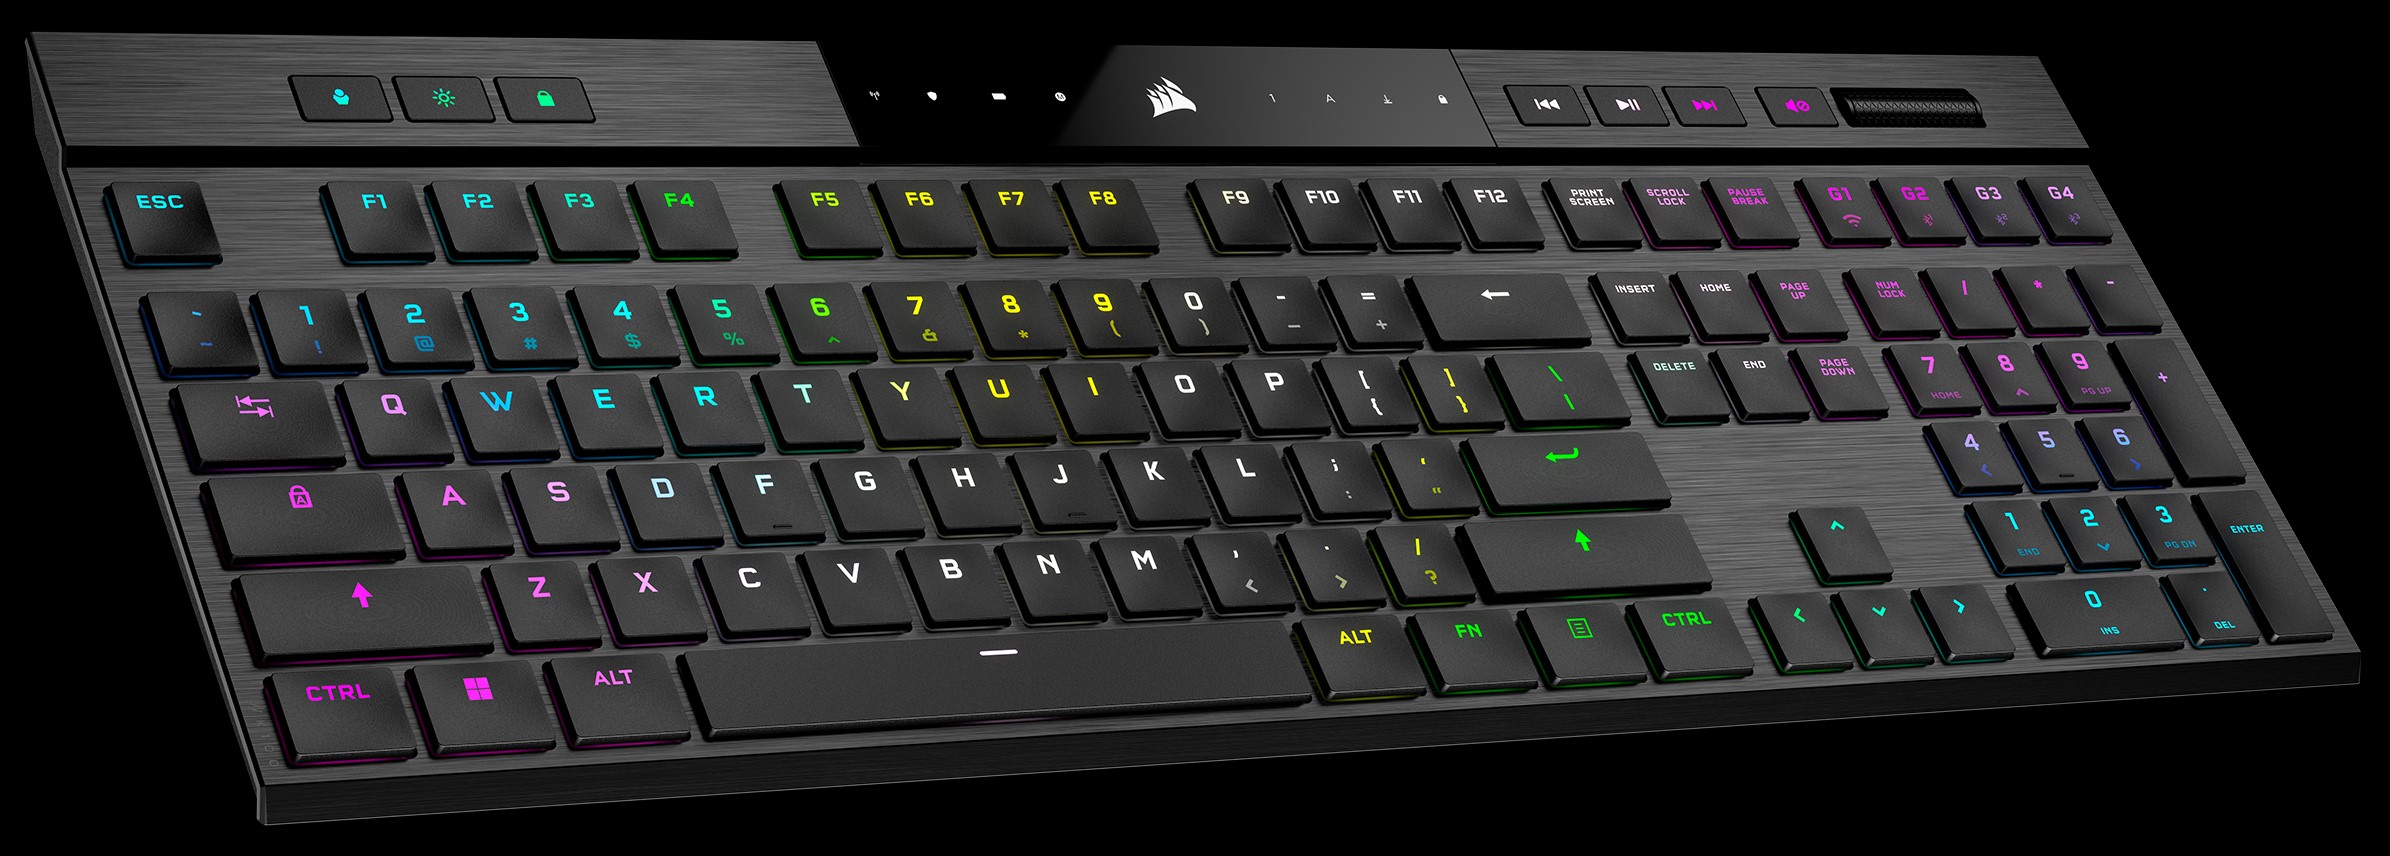 Corsair crams 4 extra keys into extremely thin wireless mechanical keyboard | Technica